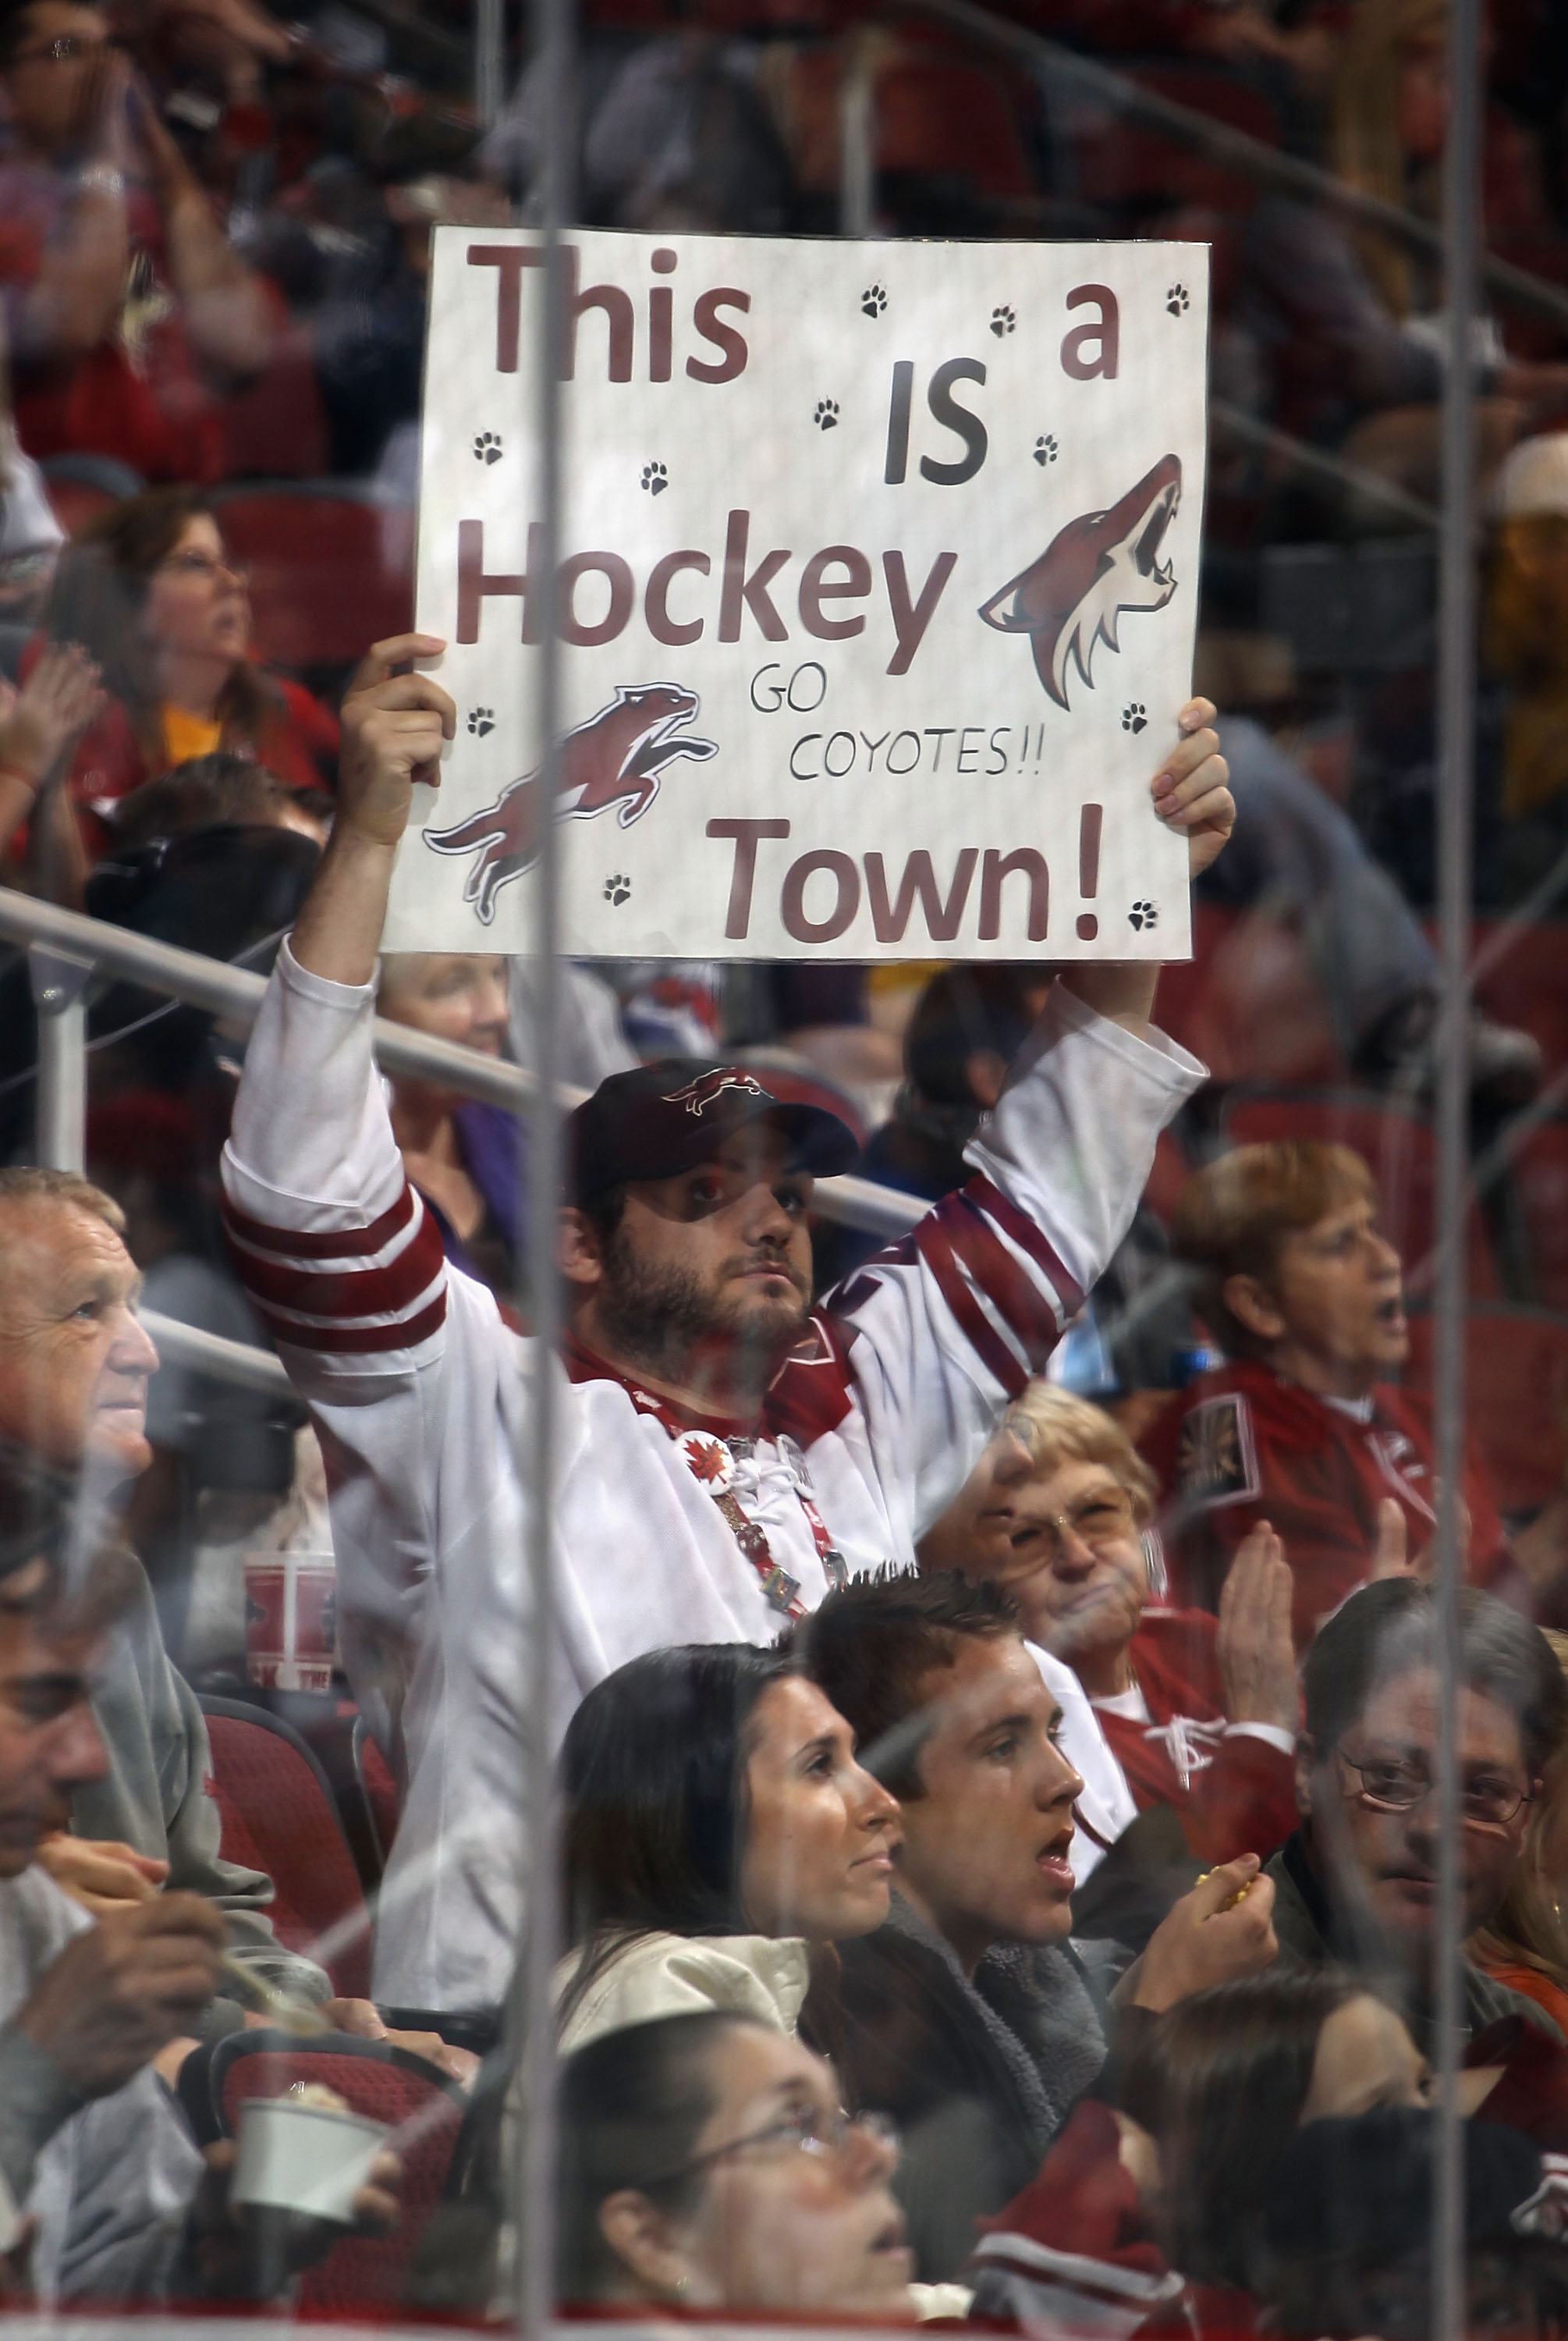 GLENDALE, AZ - MARCH 29:  Fans of the Phoenix Coyotes hold up a sign during the NHL game against the Dallas Stars at Jobing.com Arena on March 29, 2011 in Glendale, Arizona.  The Coyotes defeated the Stars 2-1 in an overtime shoot out.  (Photo by Christia